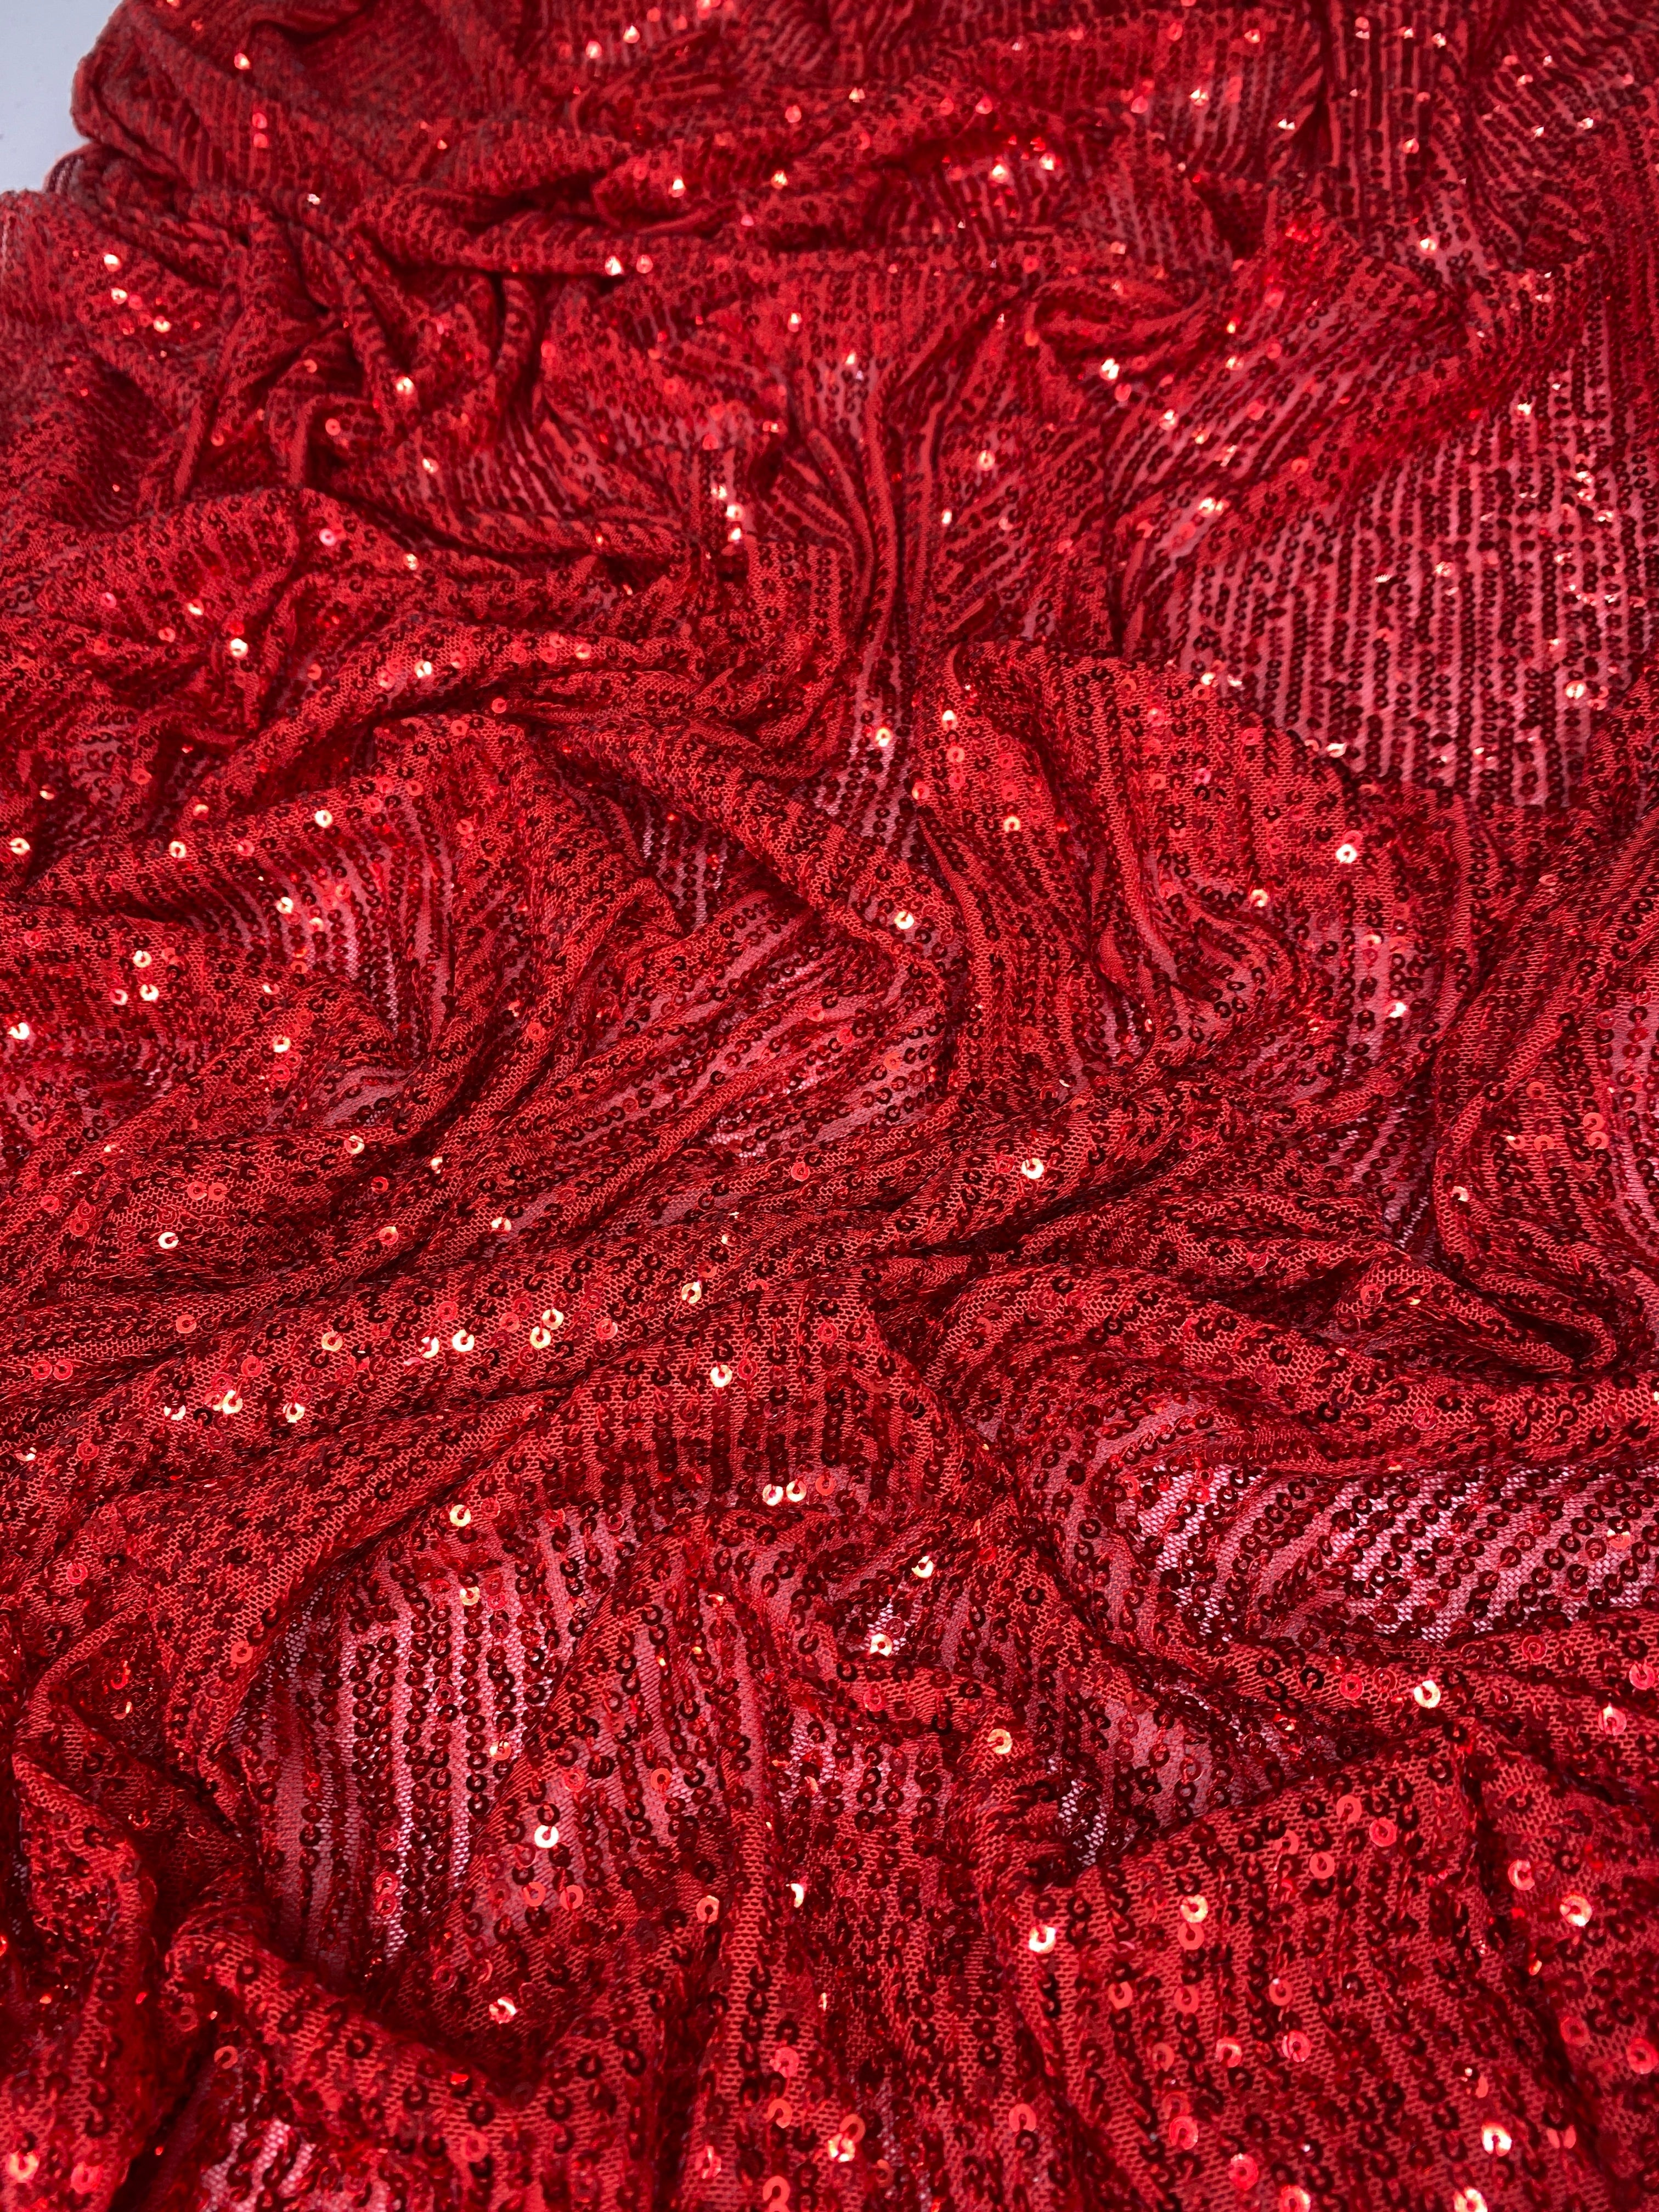 red Stretch Sequin Mesh, light red Stretch Sequin Mesh, dark red Stretch Sequin Mesh, Stretch Sequin Mesh for woman,  Stretch Sequin Mesh for bride, Stretch Sequin Mesh on sale, Stretch Sequin Mesh on discount, Stretch Sequin Mesh online